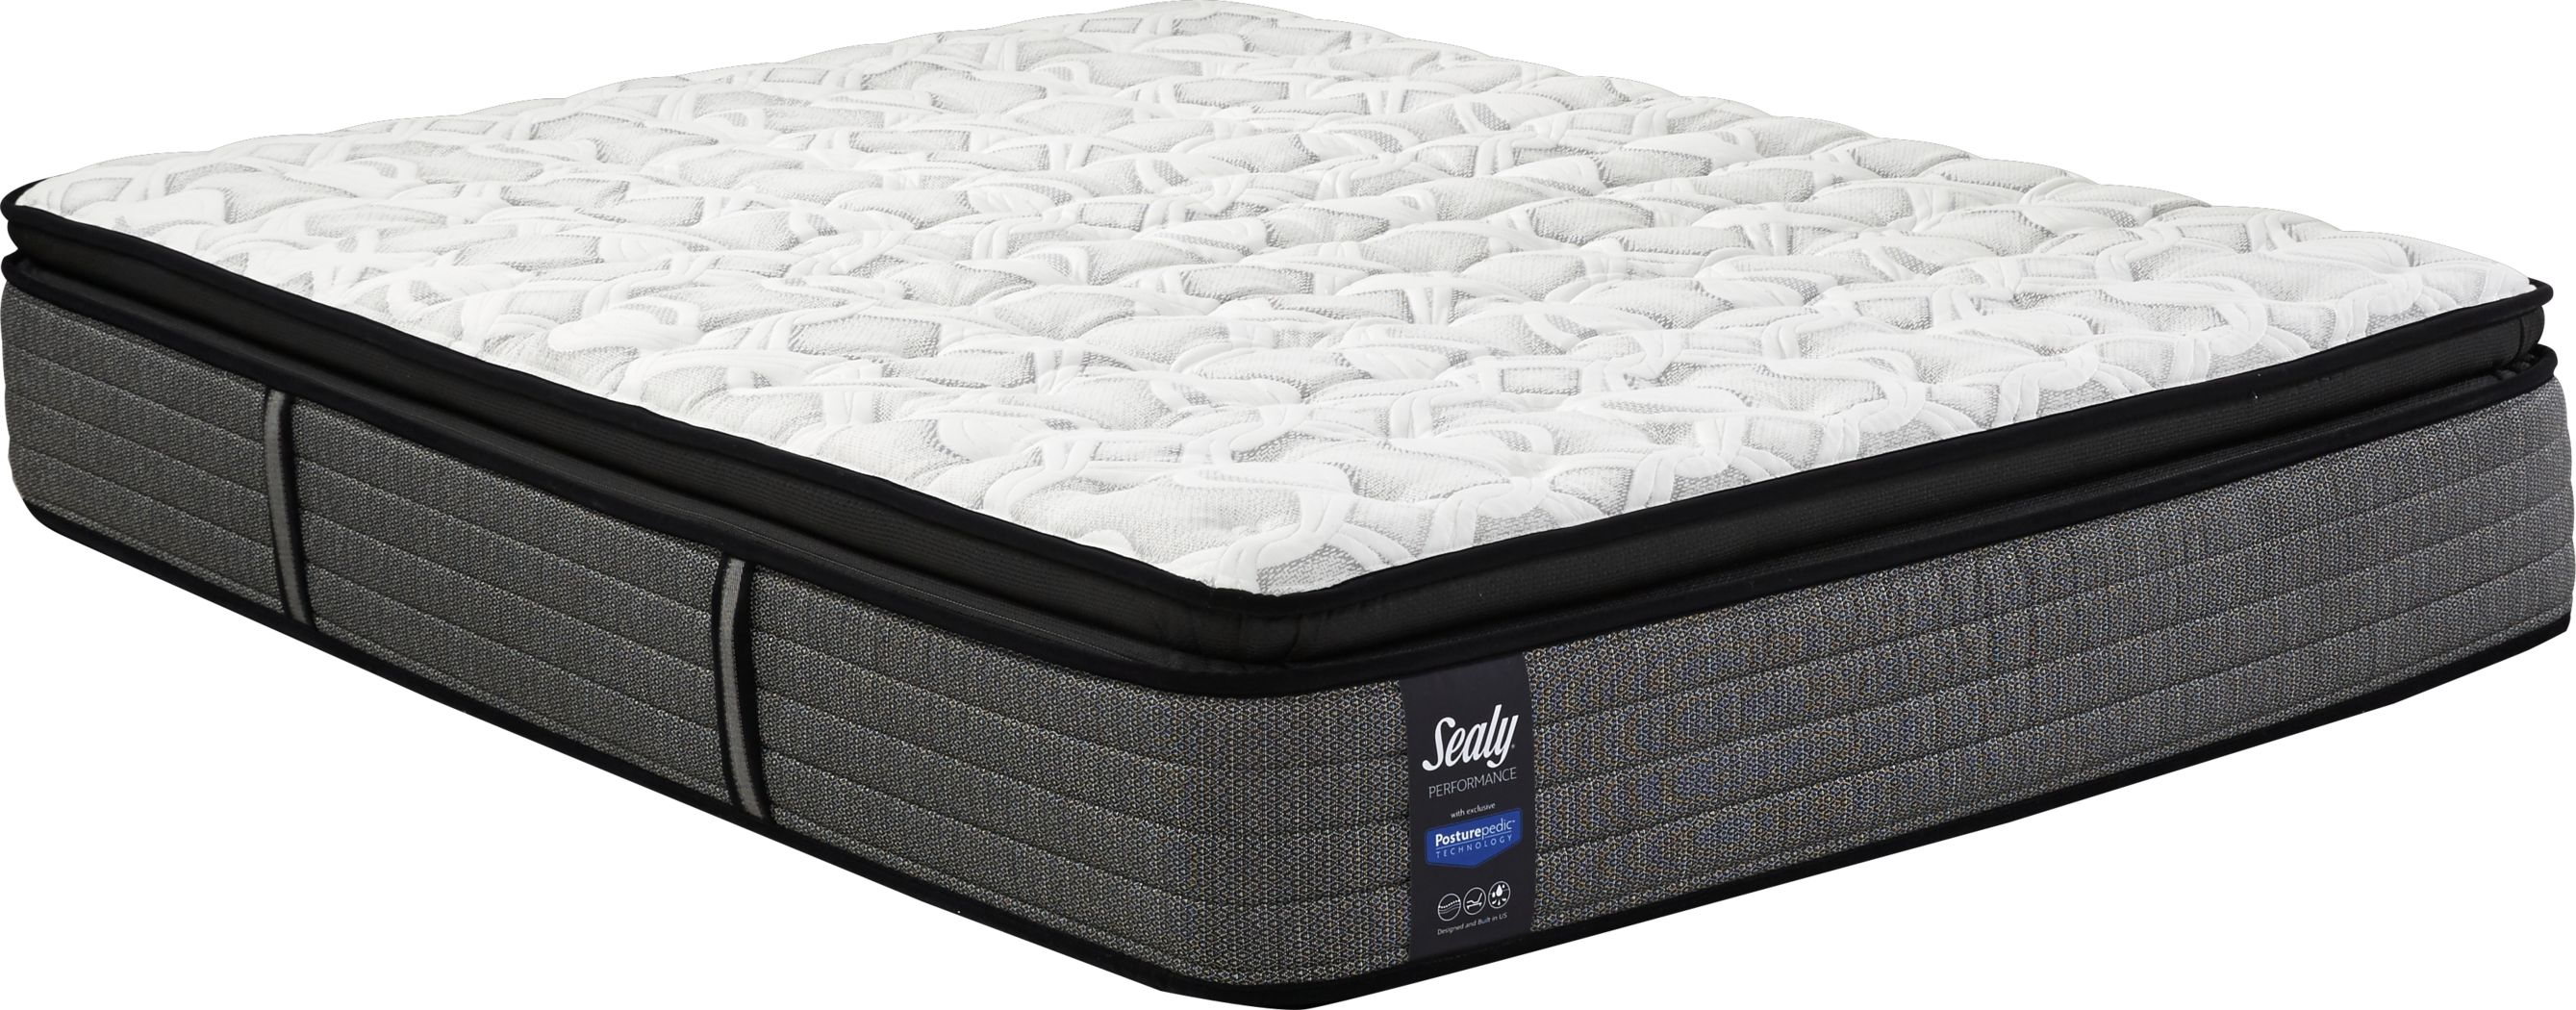 sealy cambria heights firm queen mattress set warranty